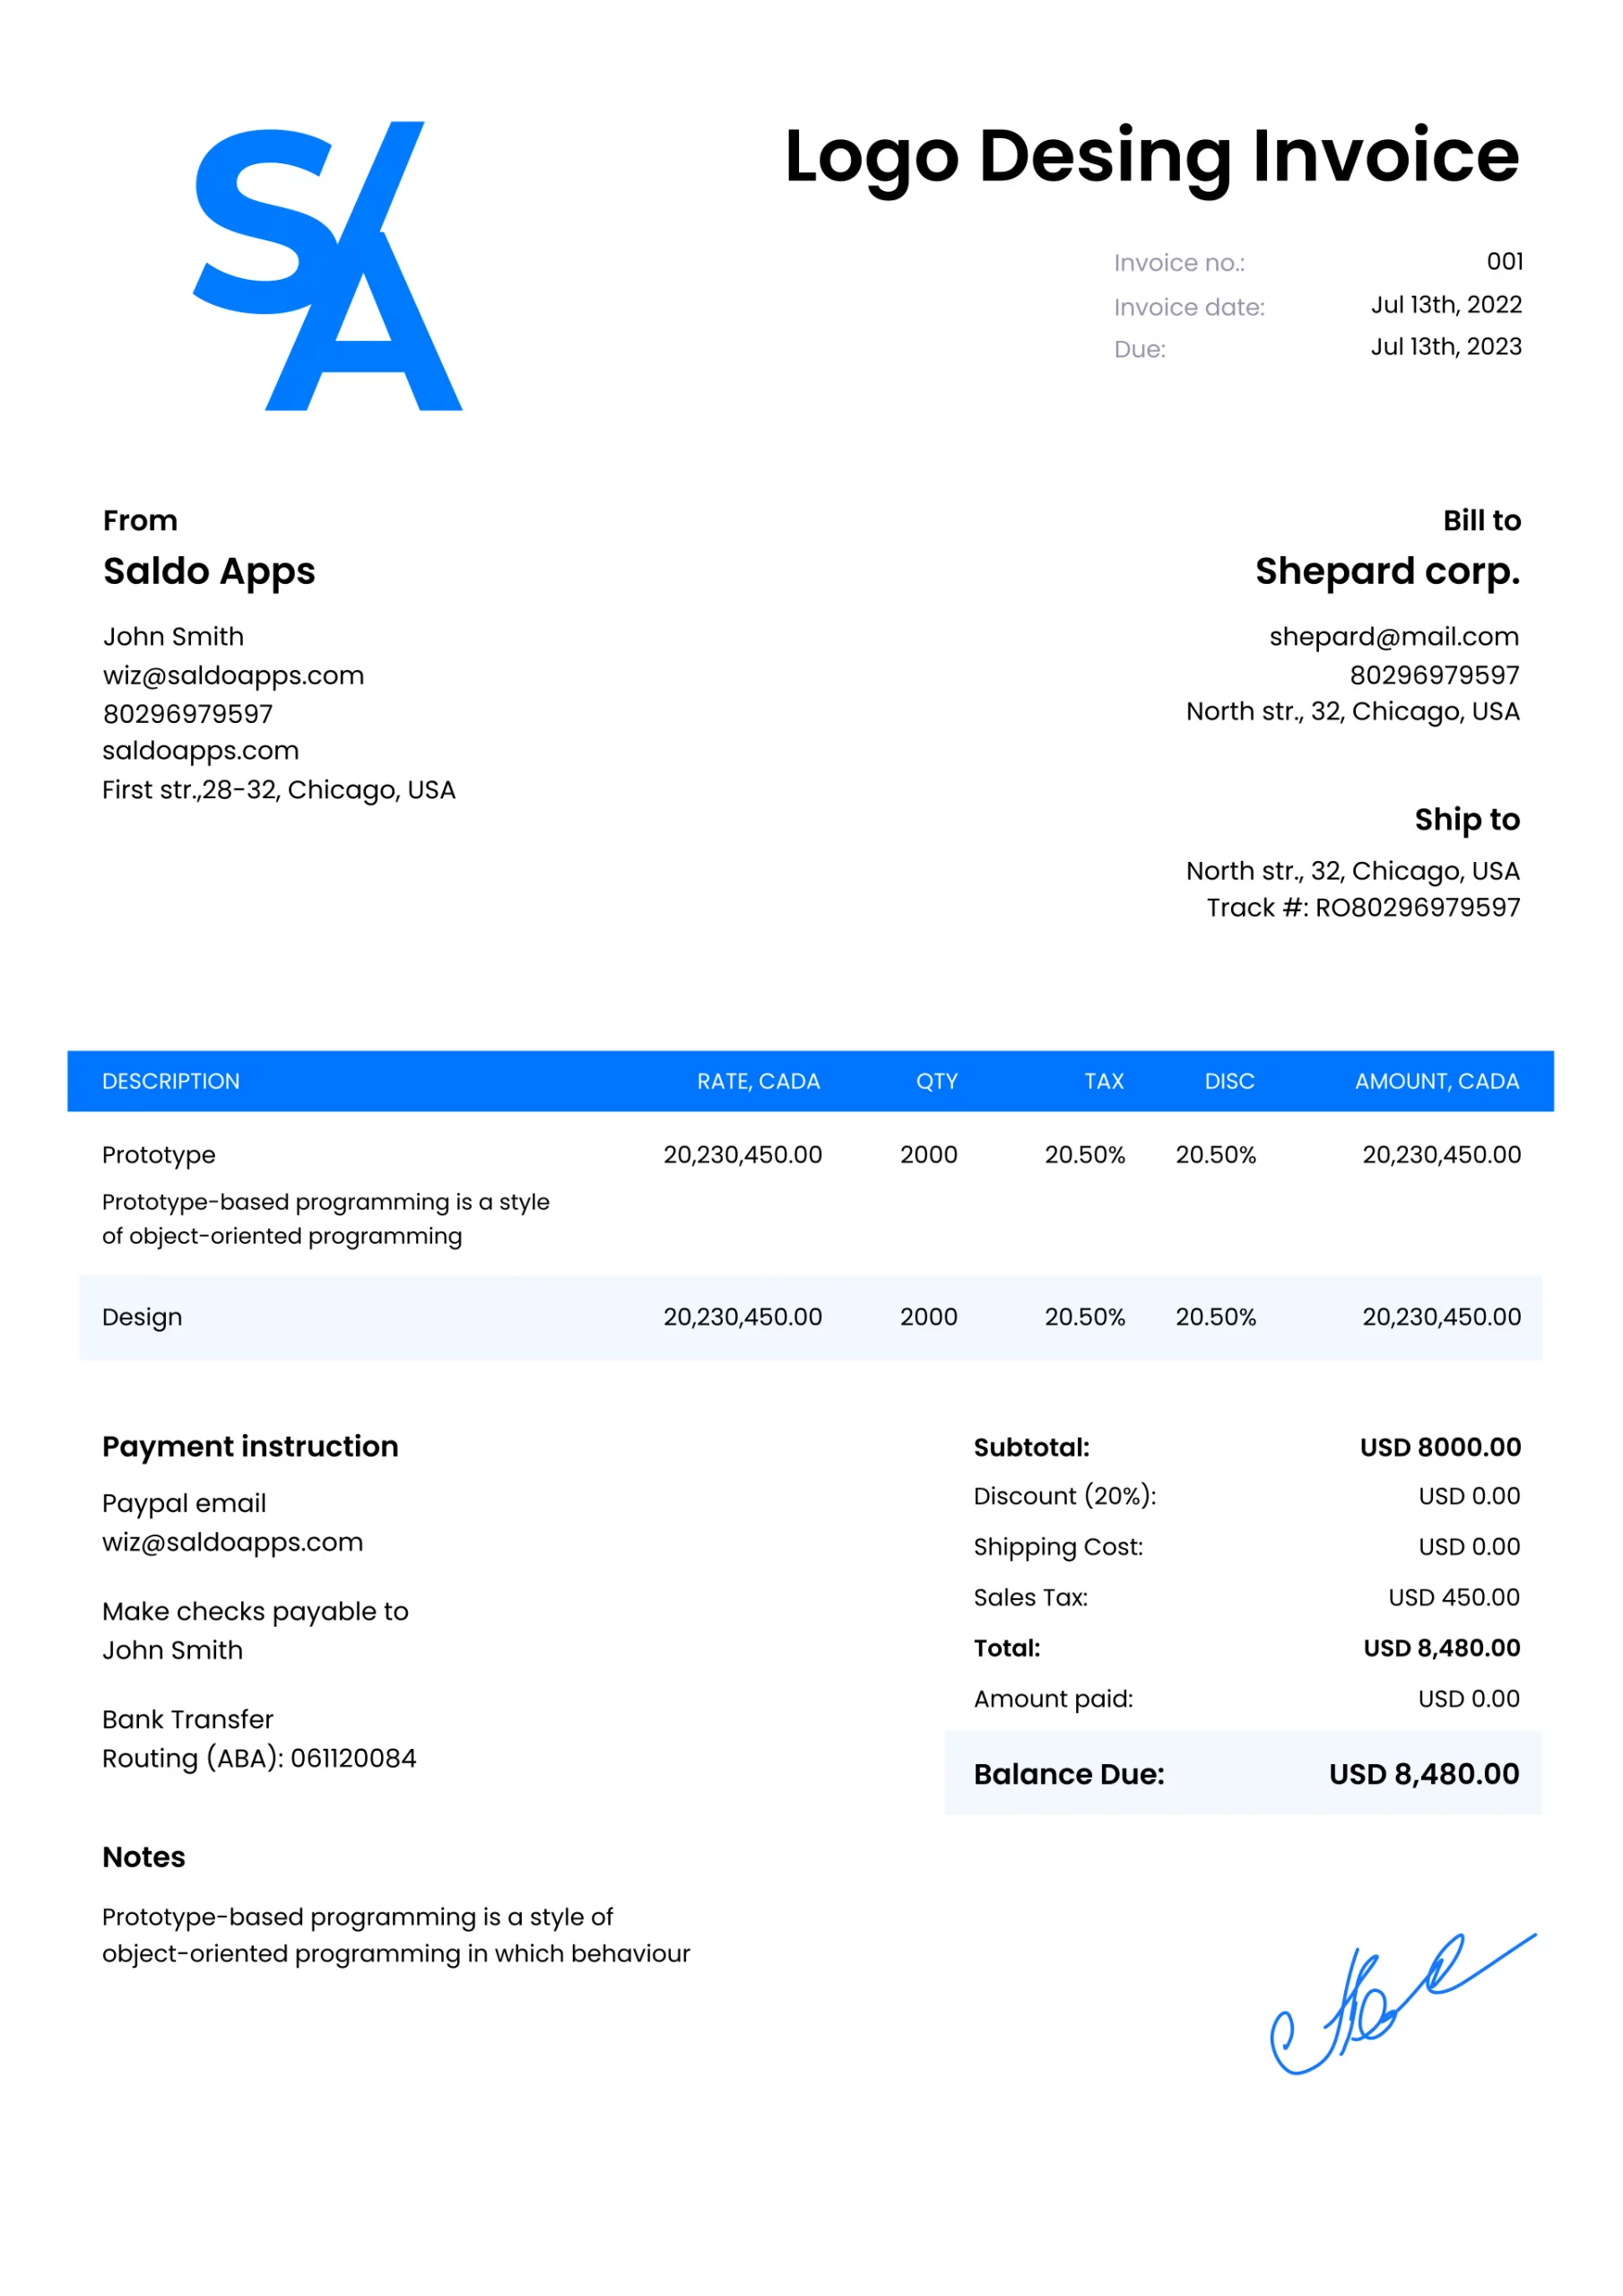 Invoice Templates With Logo: Download Logo Invoice